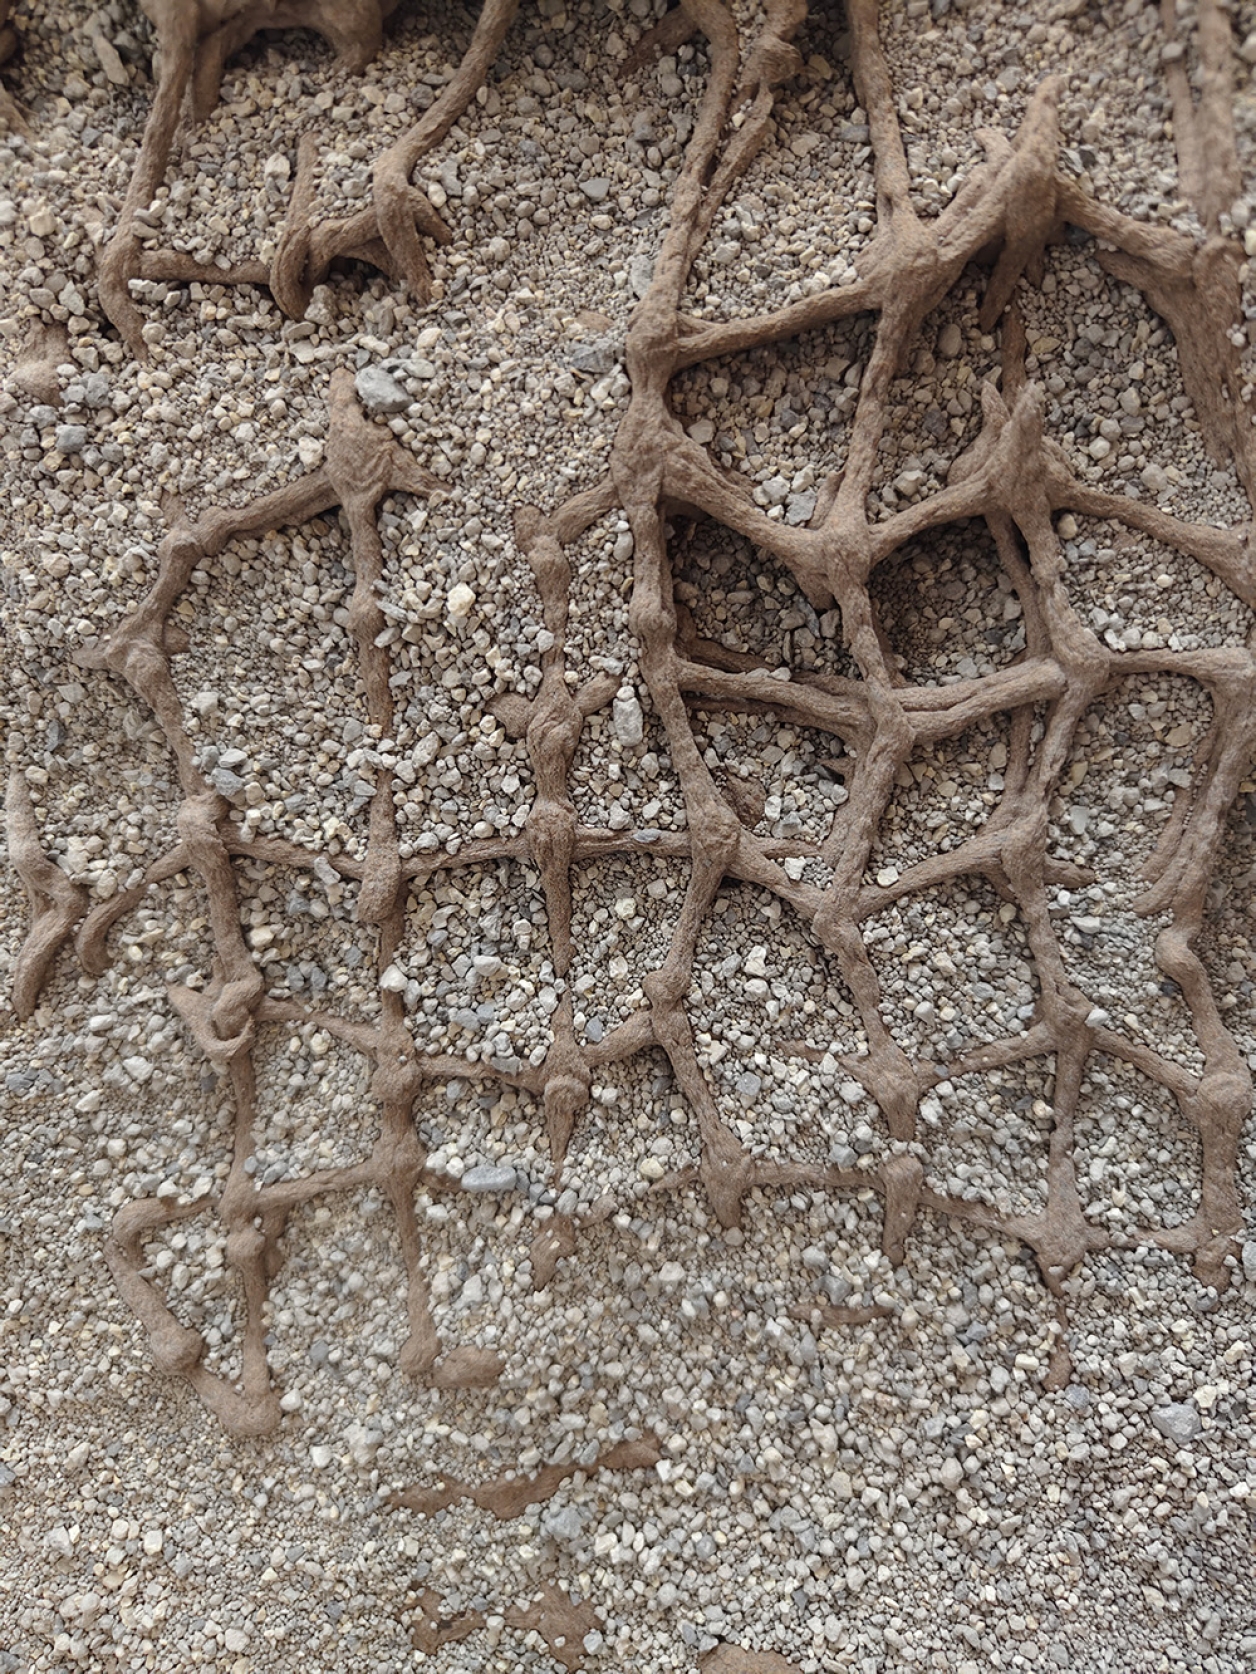 Sandscape: how to design a structure system to form the dune